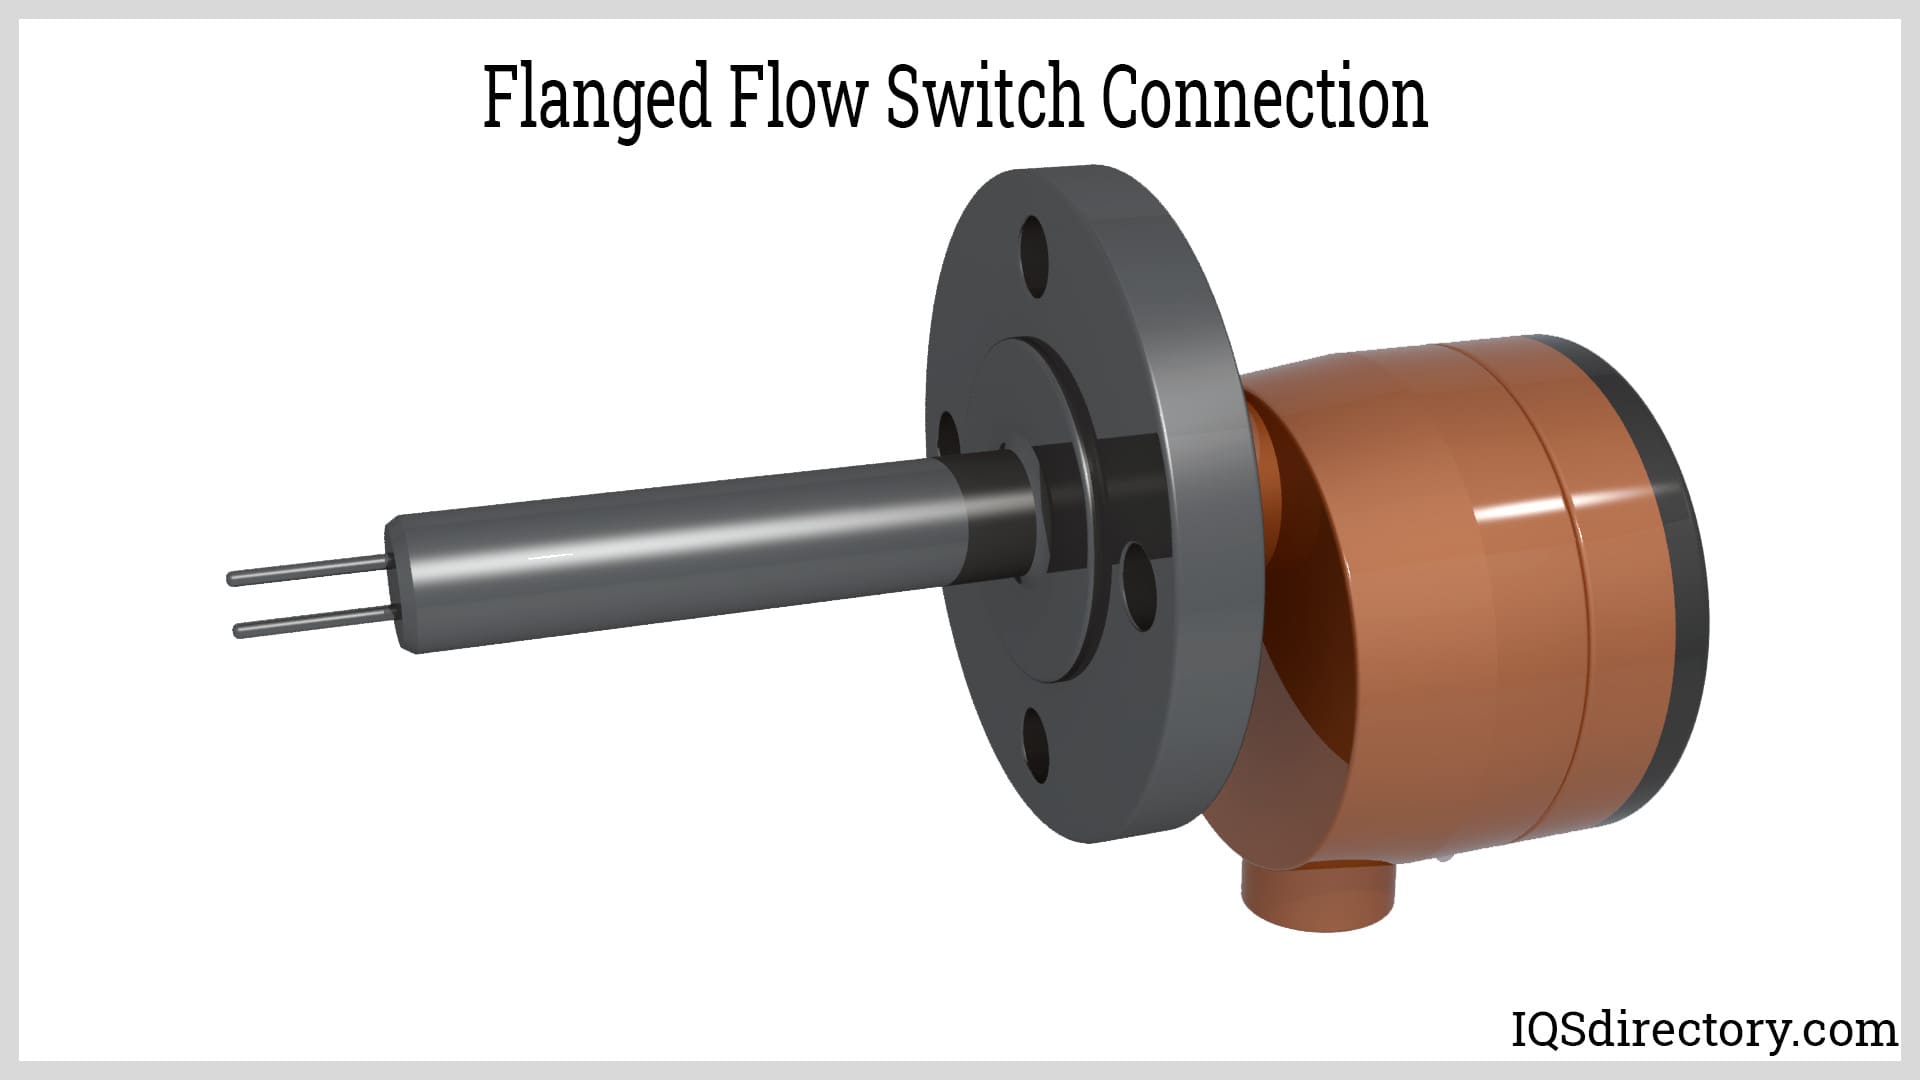 Flanged Flow Switch Connection